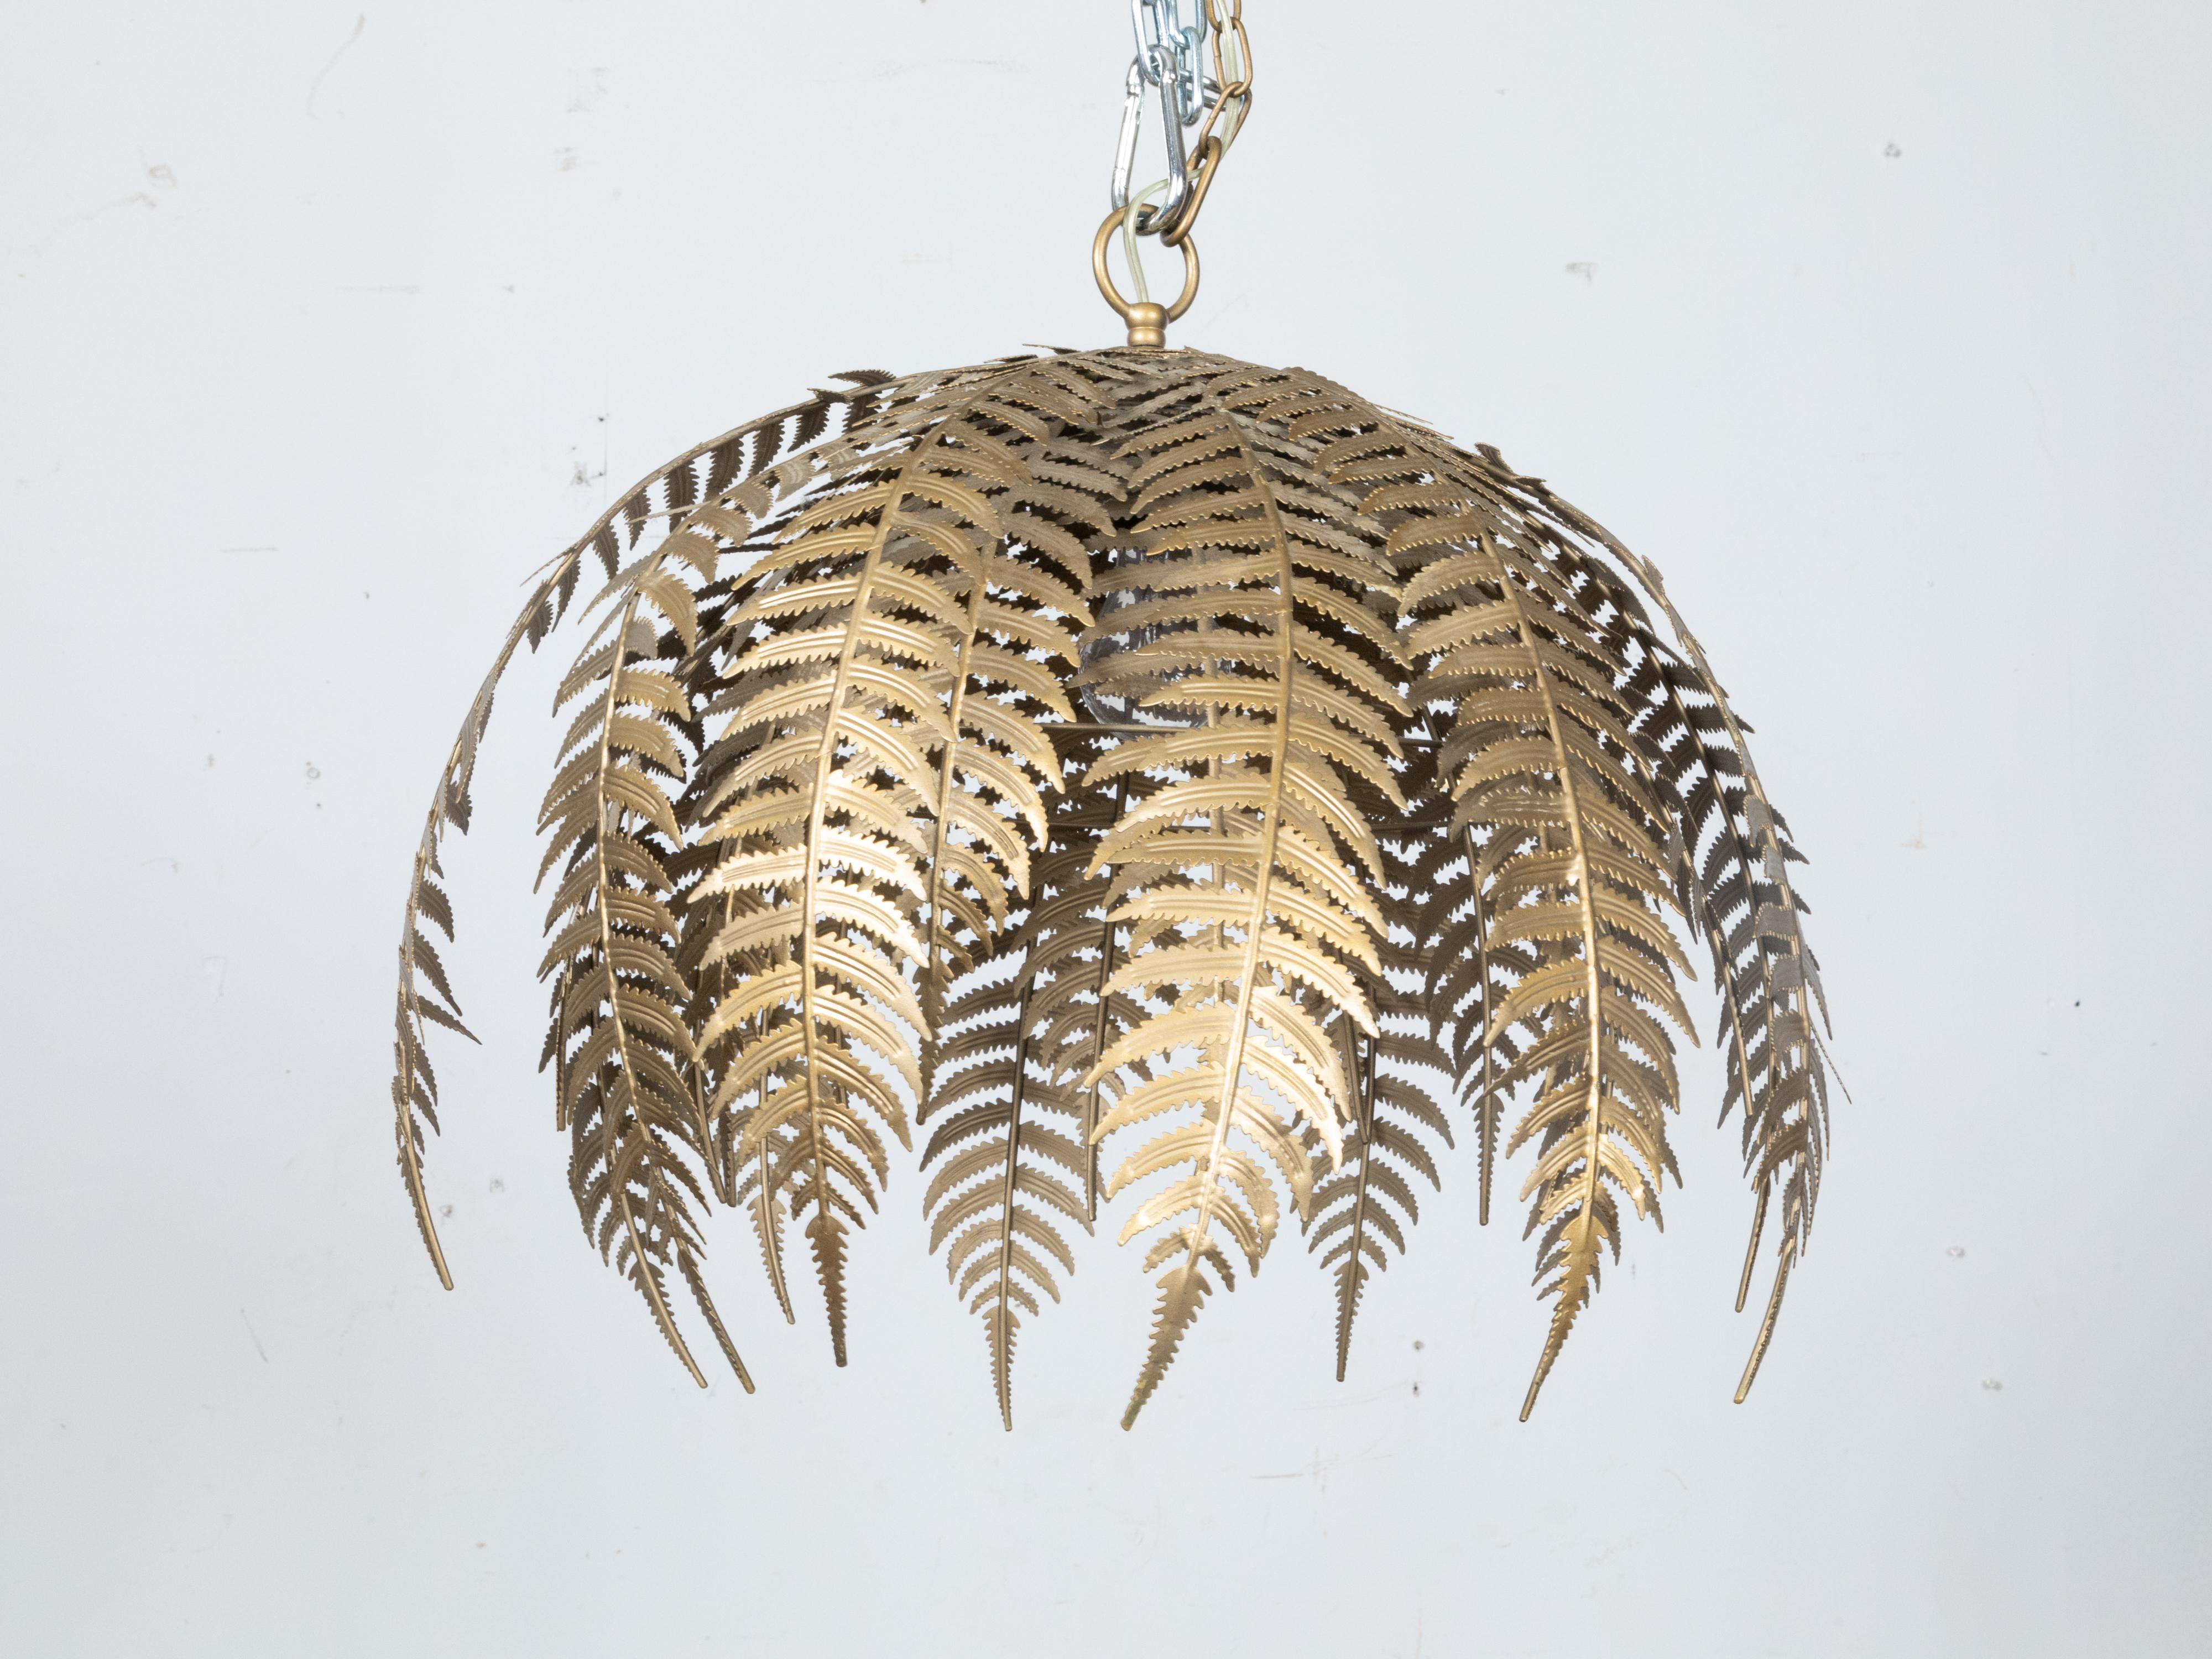 20th Century French Midcentury Gilt Metal Fern Chandelier with Single Light, Wired for the US